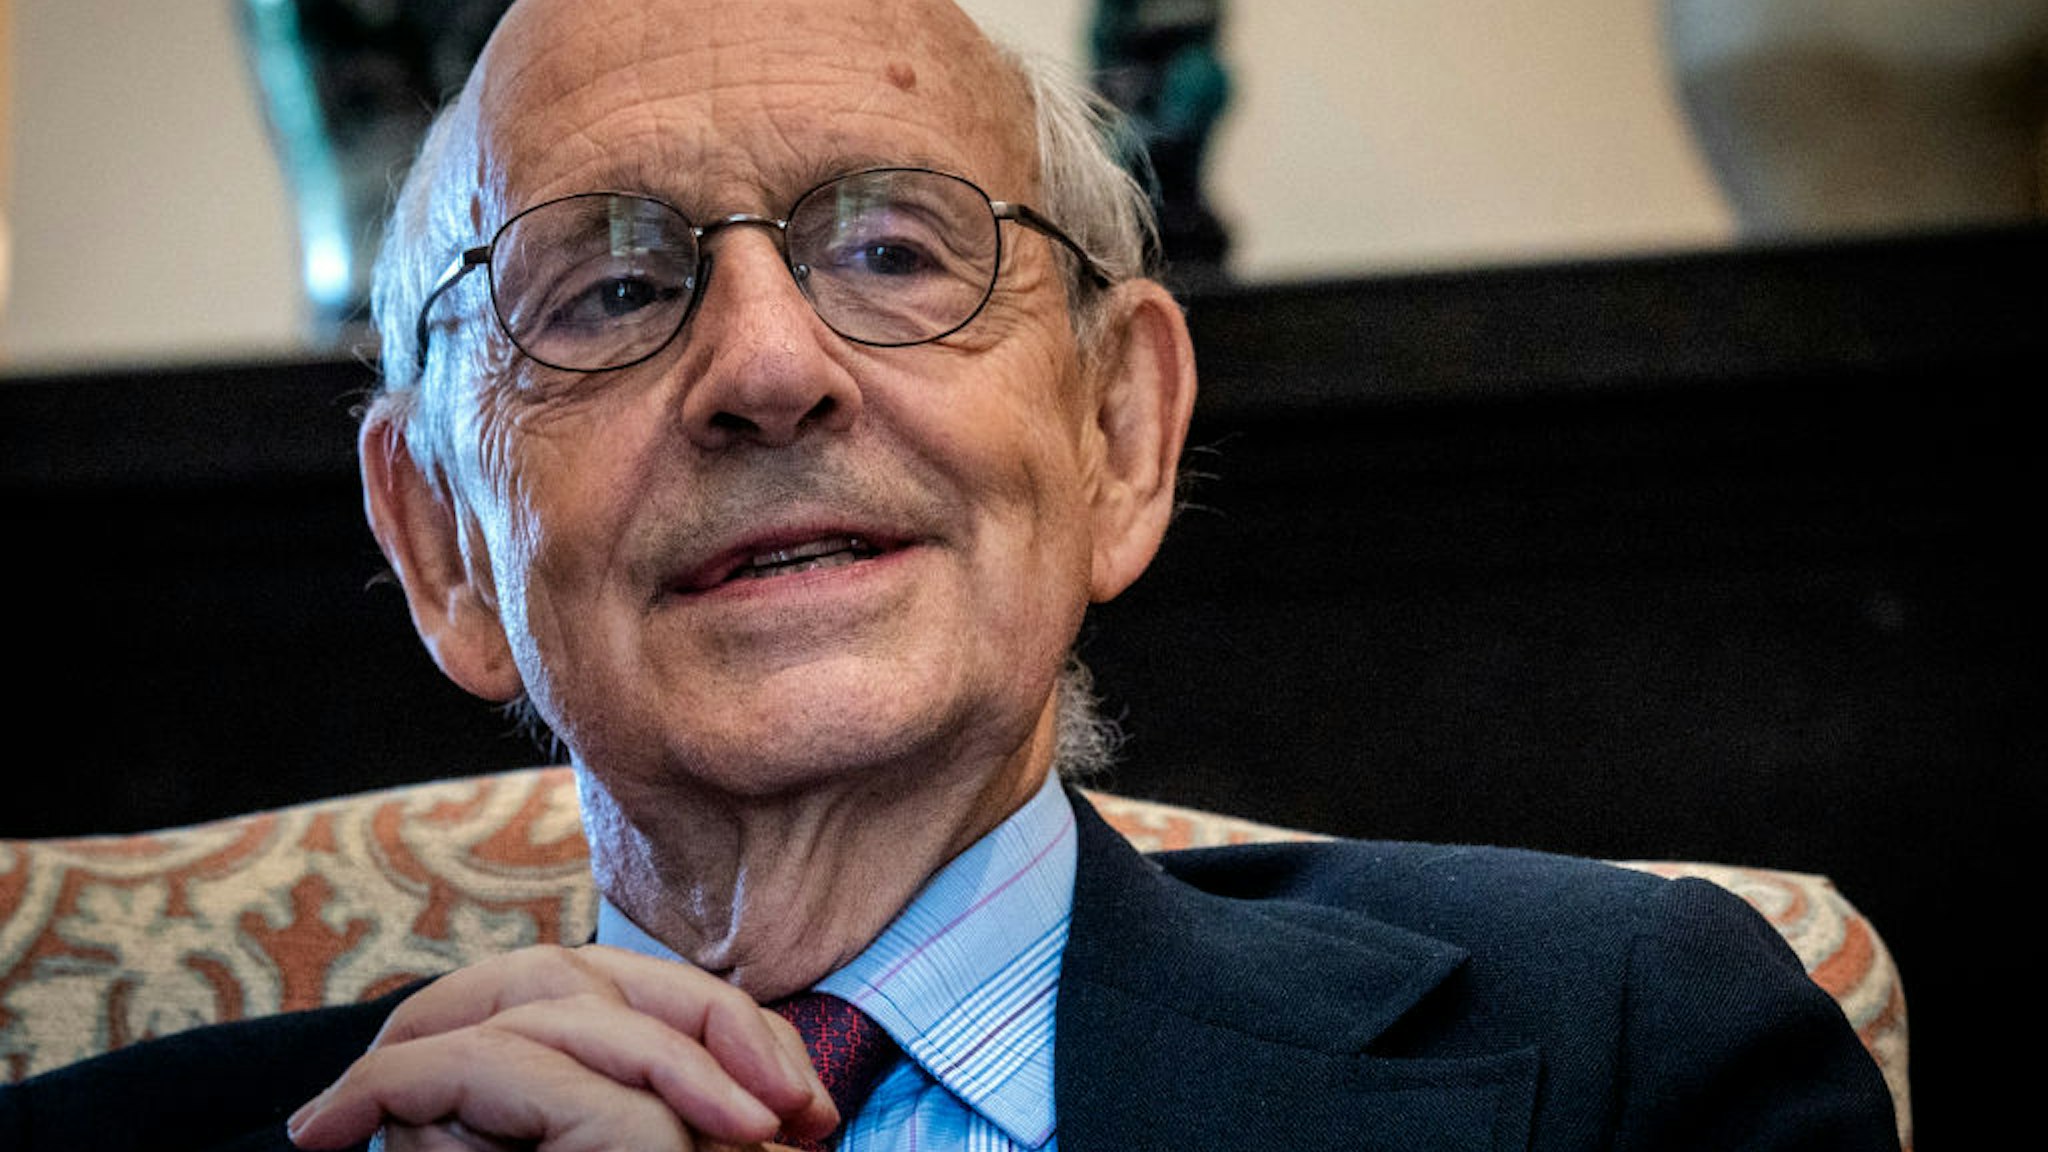 WASHINGTON, DC - AUGUST 27: Supreme Court Justice Stephen Breyer during our interview in his office , in Washington, DC. (Photo by Bill O'Leary/The Washington Post via Getty Images)